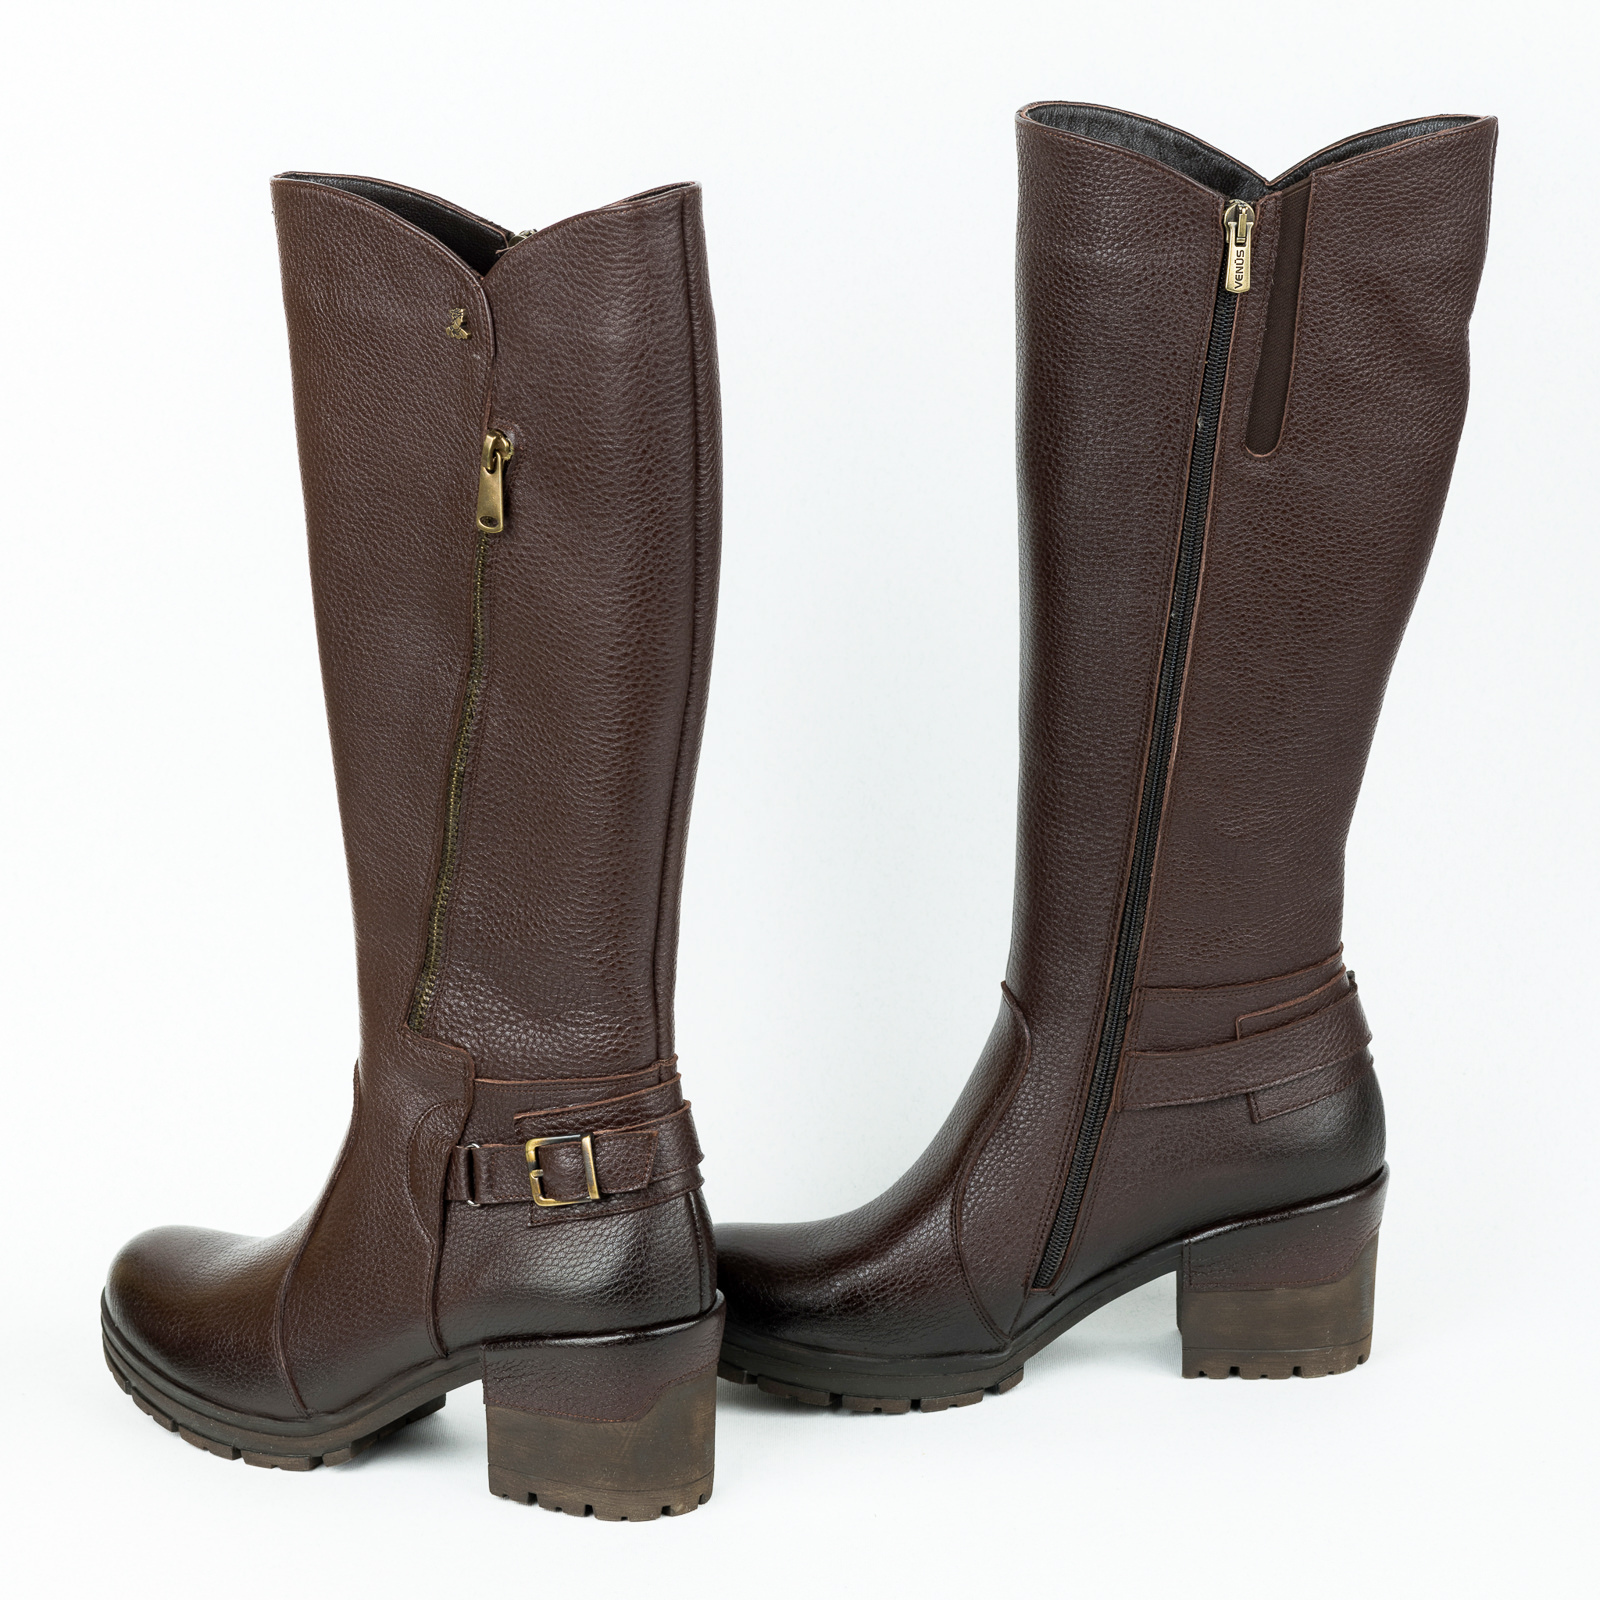 Leather boots B636 - BROWN